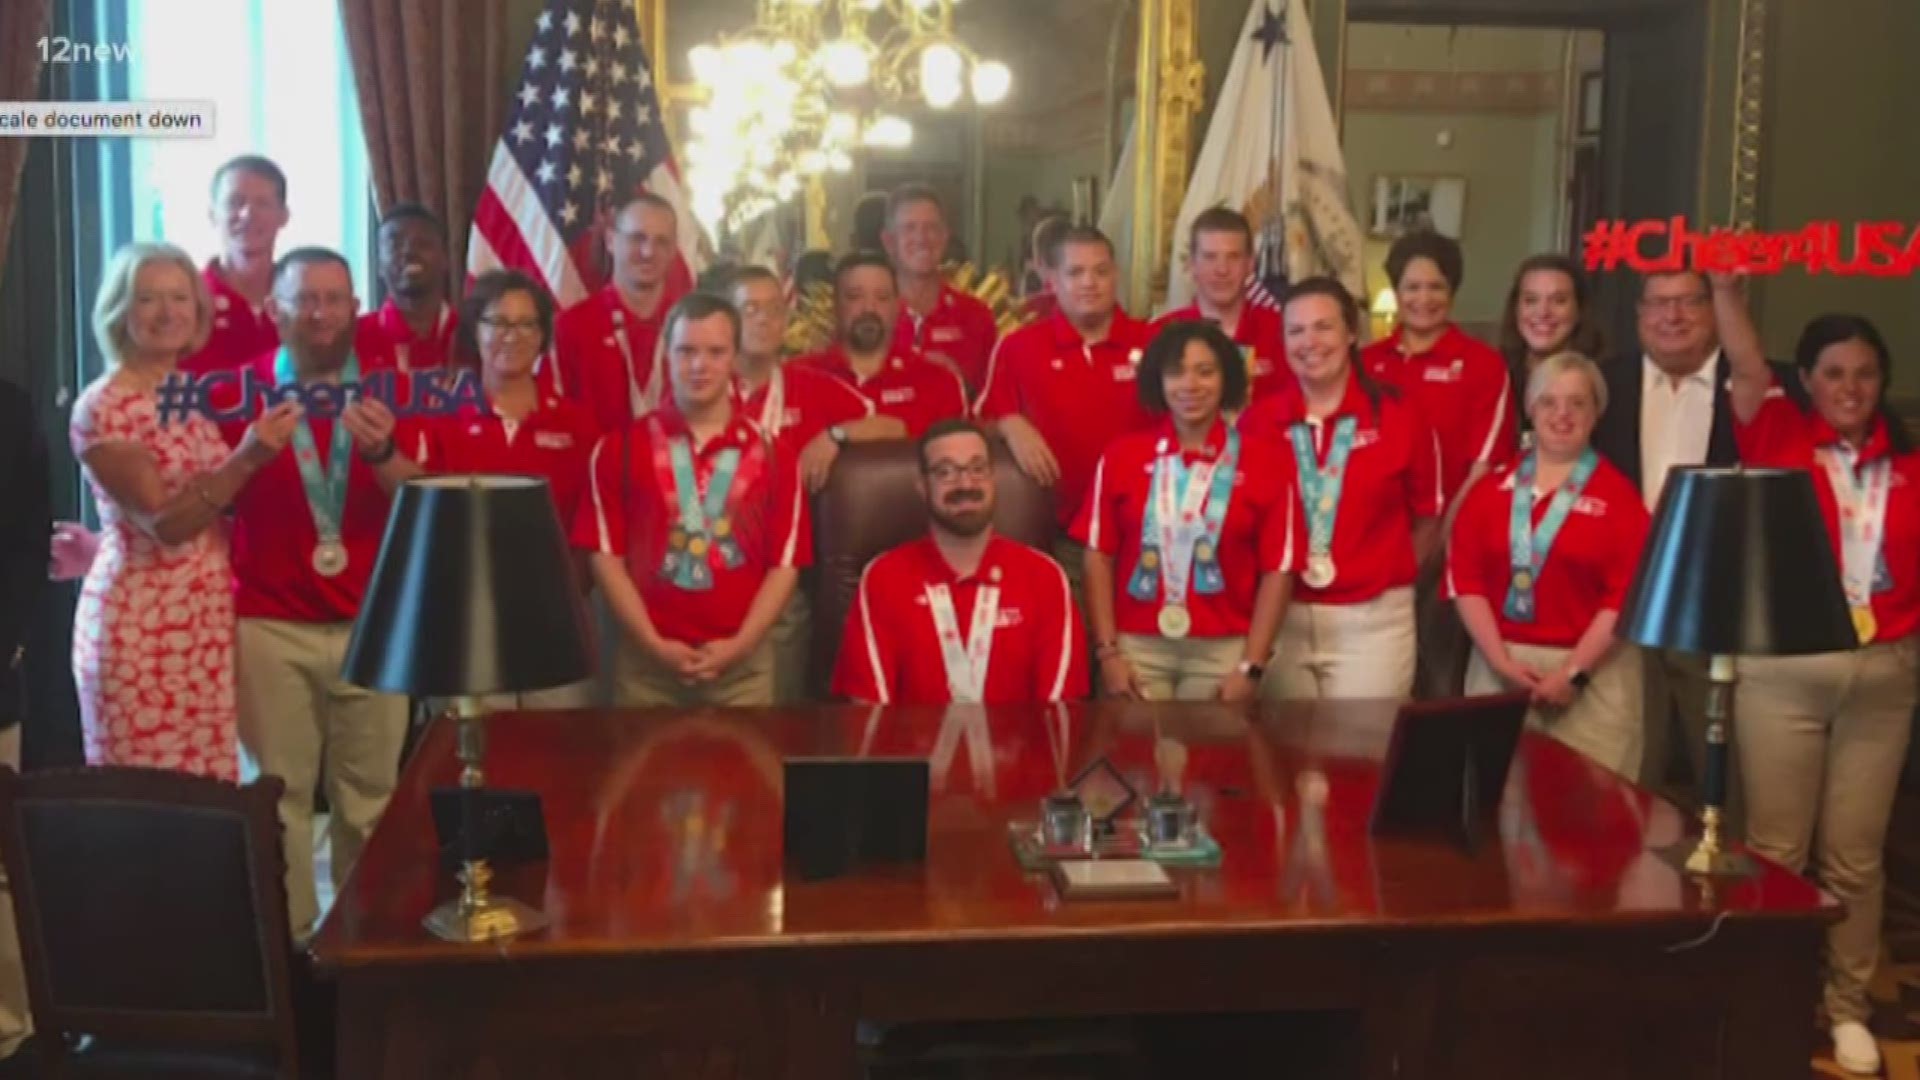 Tasha Crofton and her son Sawne Rippey were part of a group invited to the White House for their accomplishments at the Special Olympics World Games Abu Dhabi 2019. Team 12's Trisha Hendricks has the story.